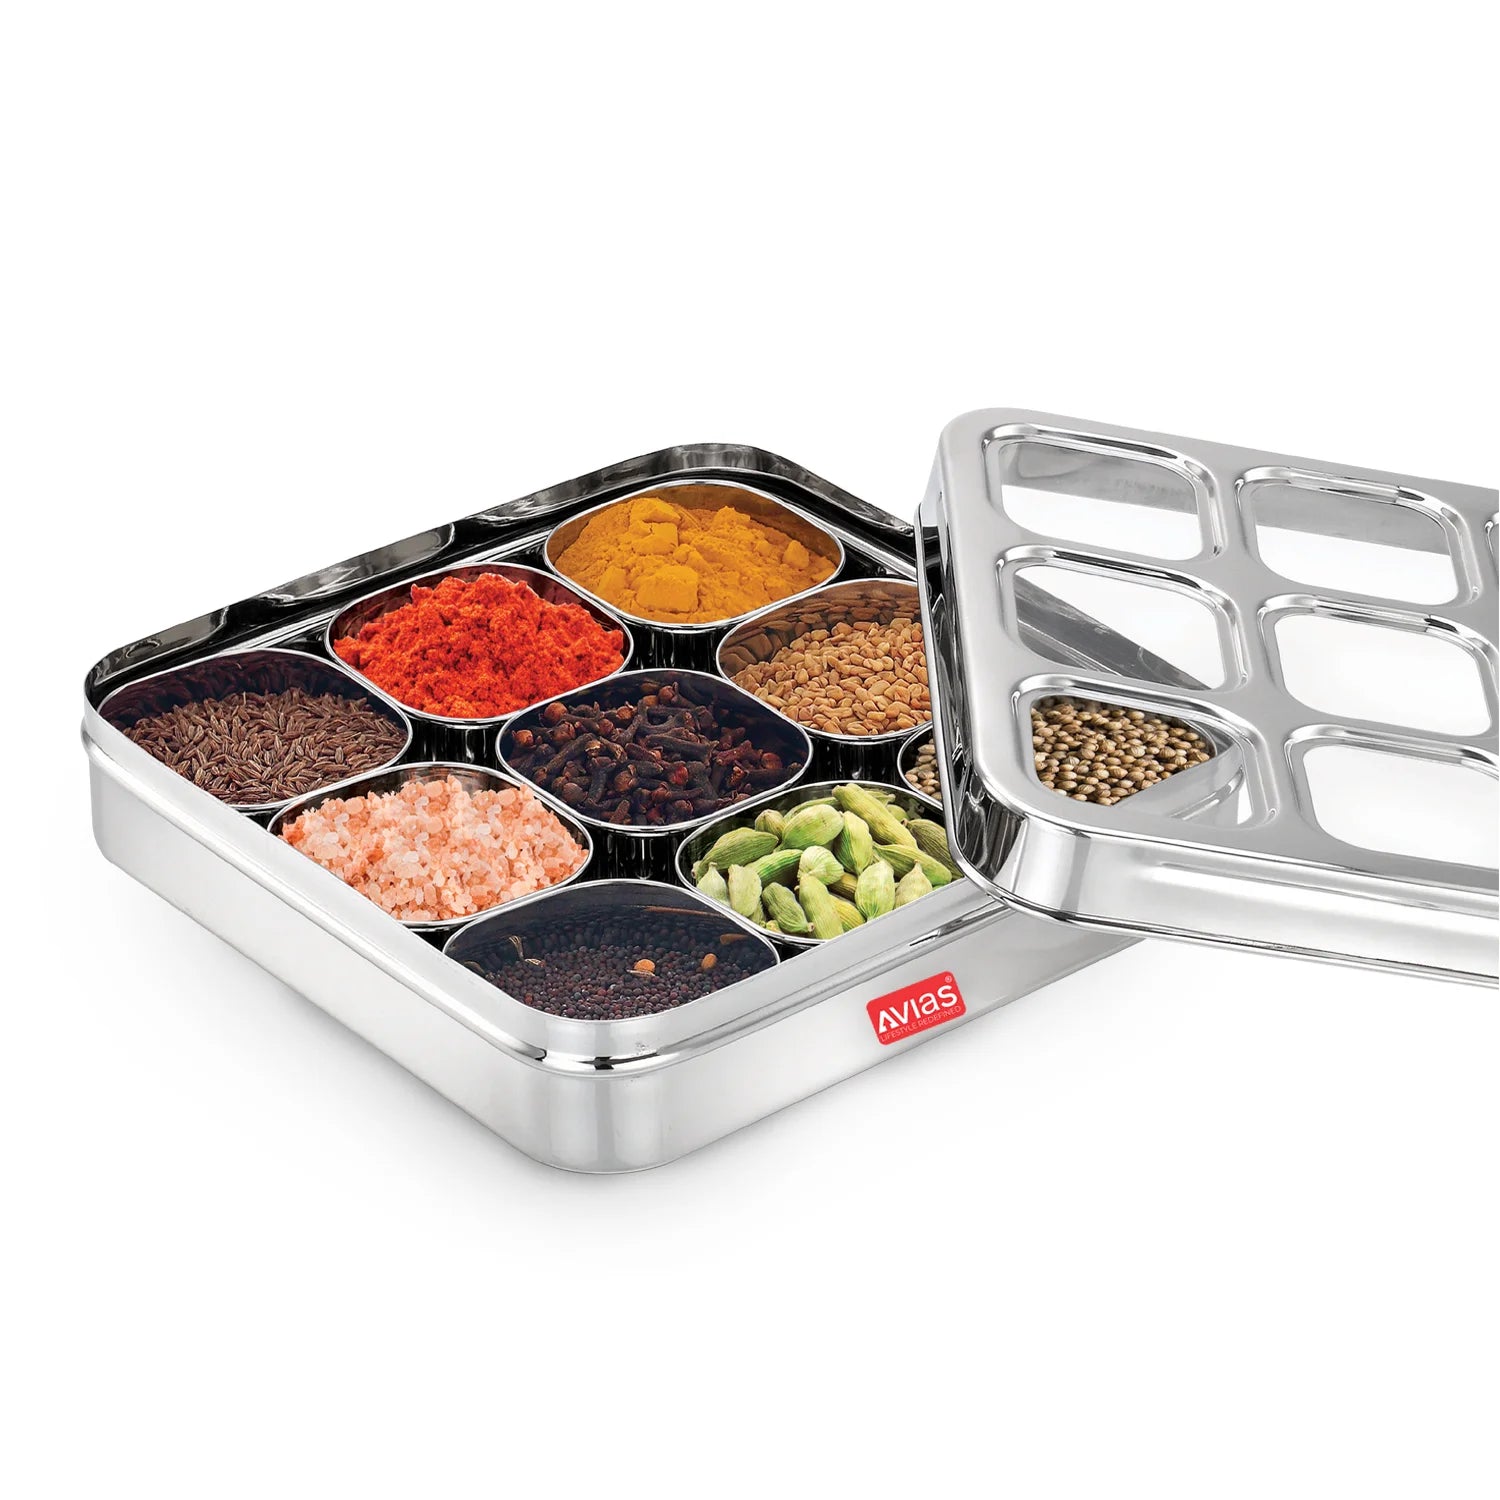 AVIAS stainless steel dry fruit cum spice box with 9 square compartments with spices